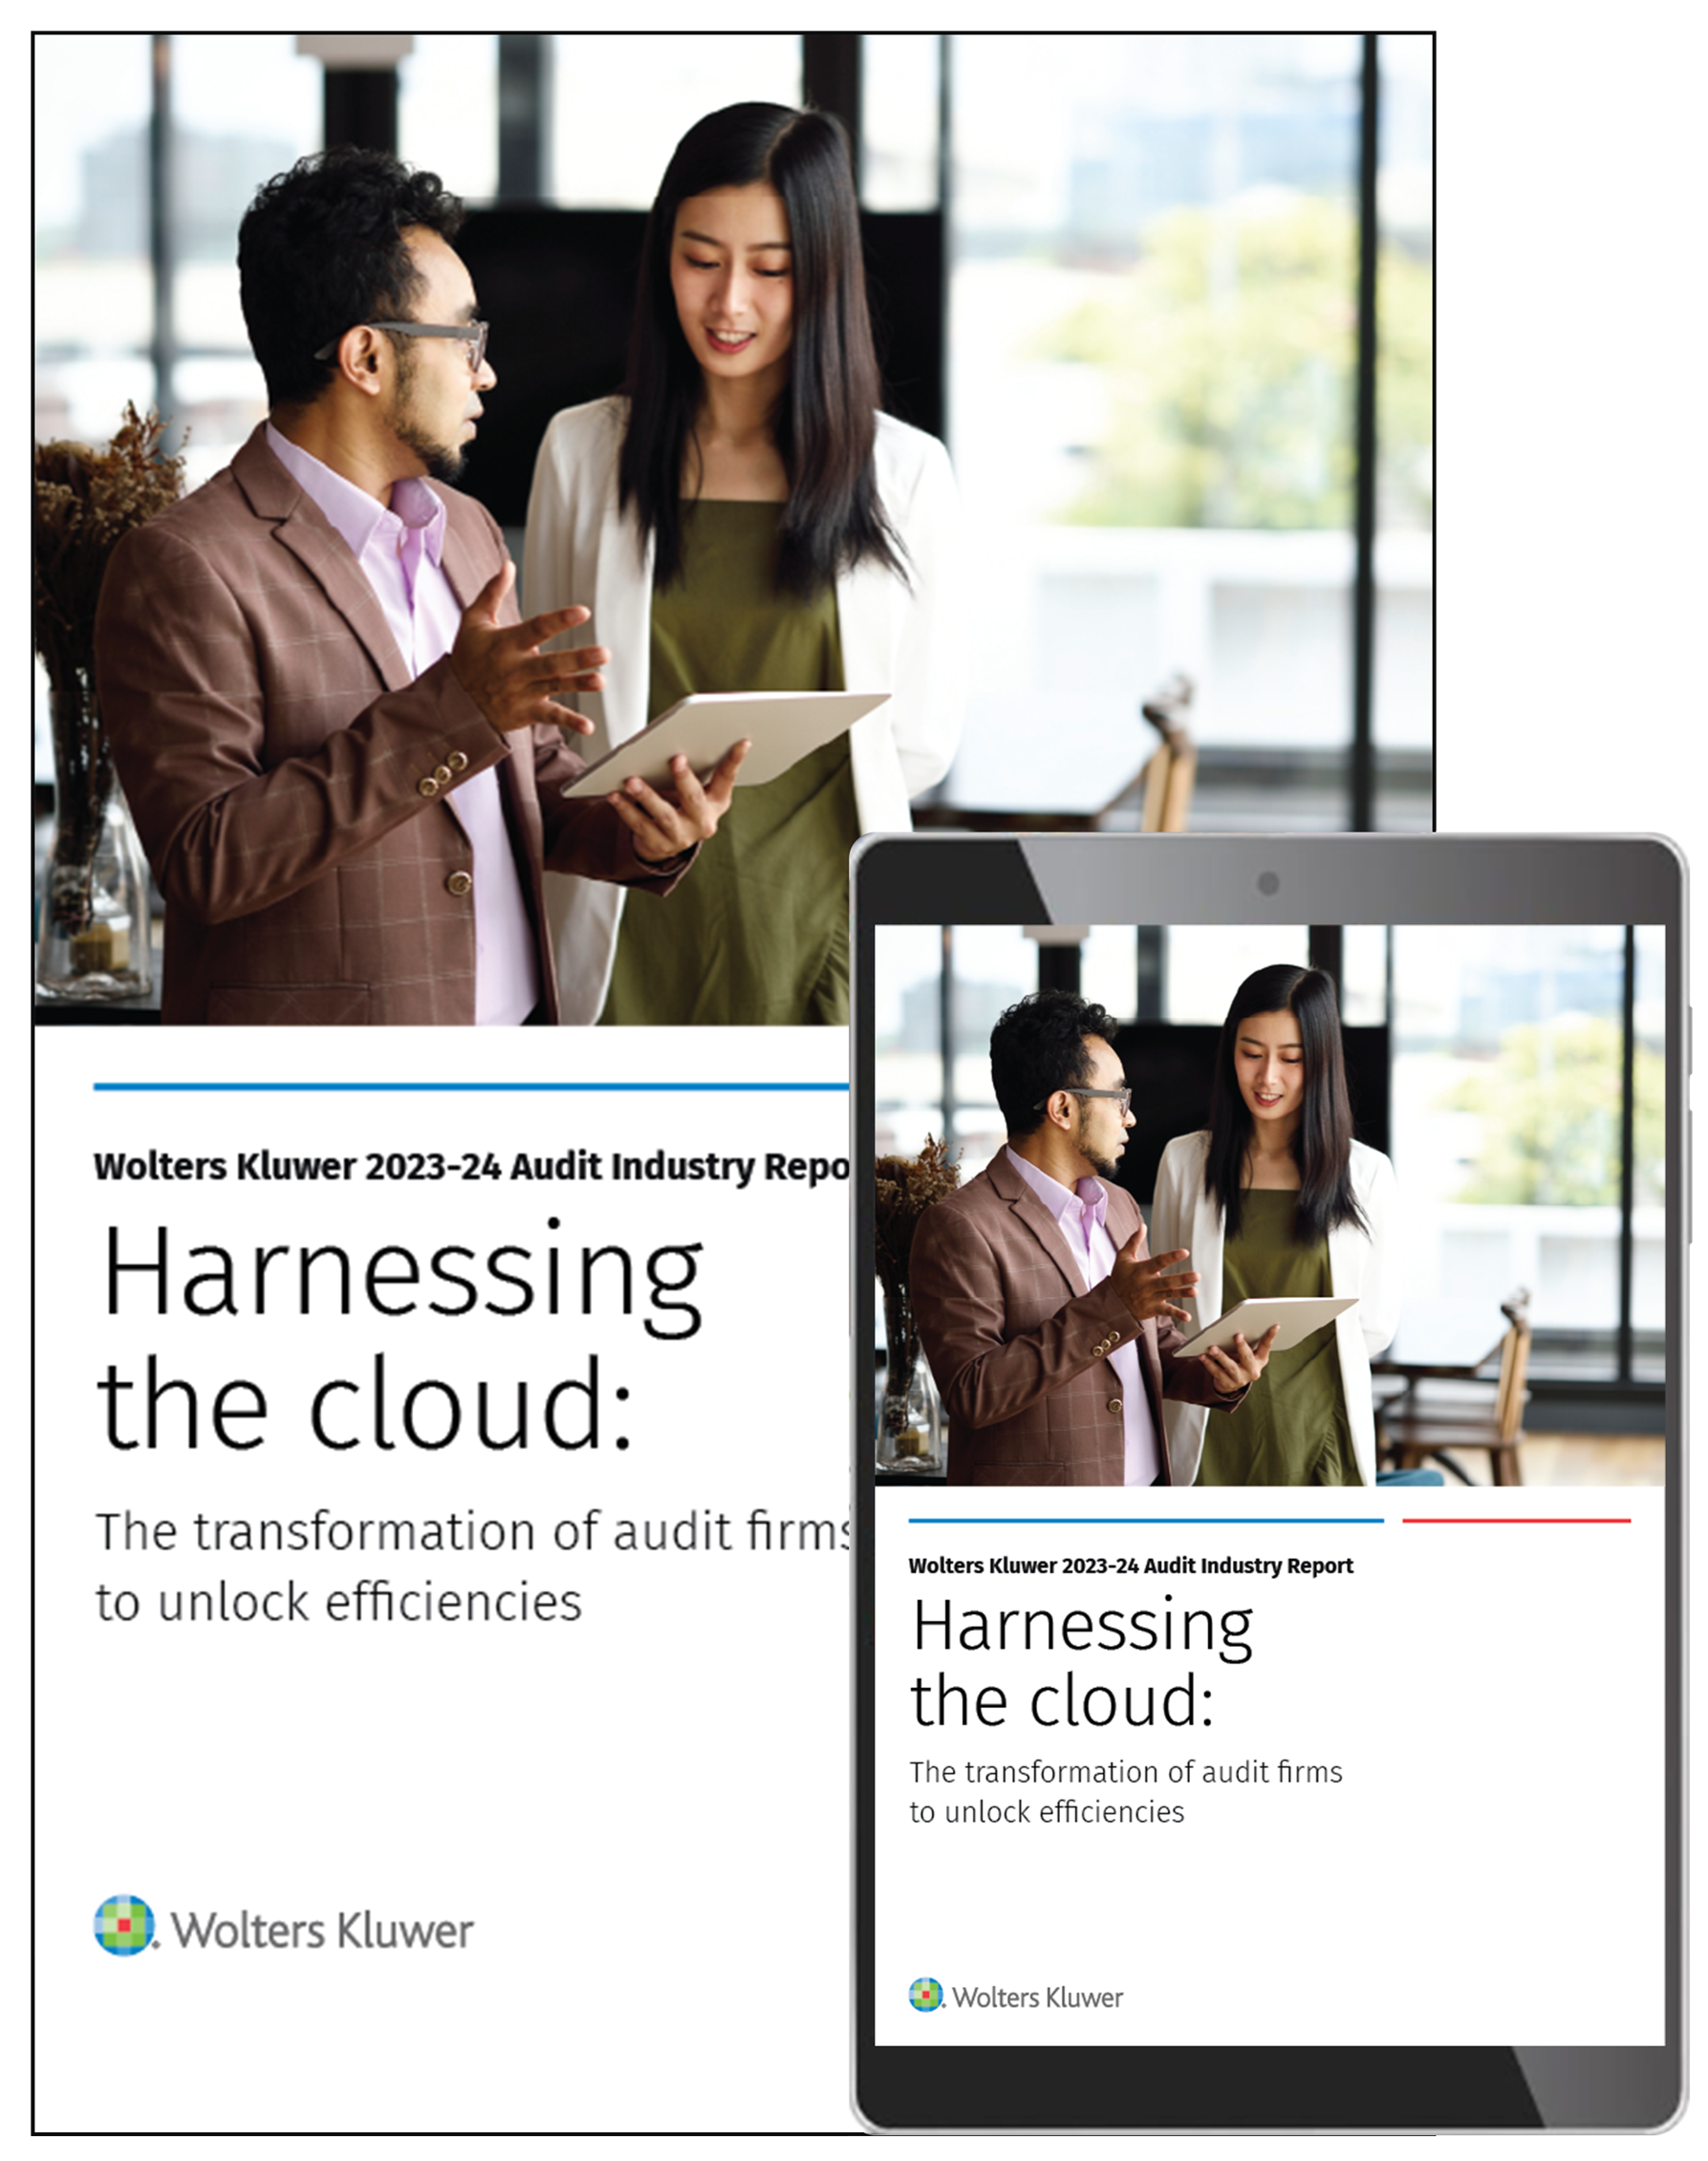 2023-24 Wolters Kluwer Audit Industry Report cover, shown as book and on a tablet screen